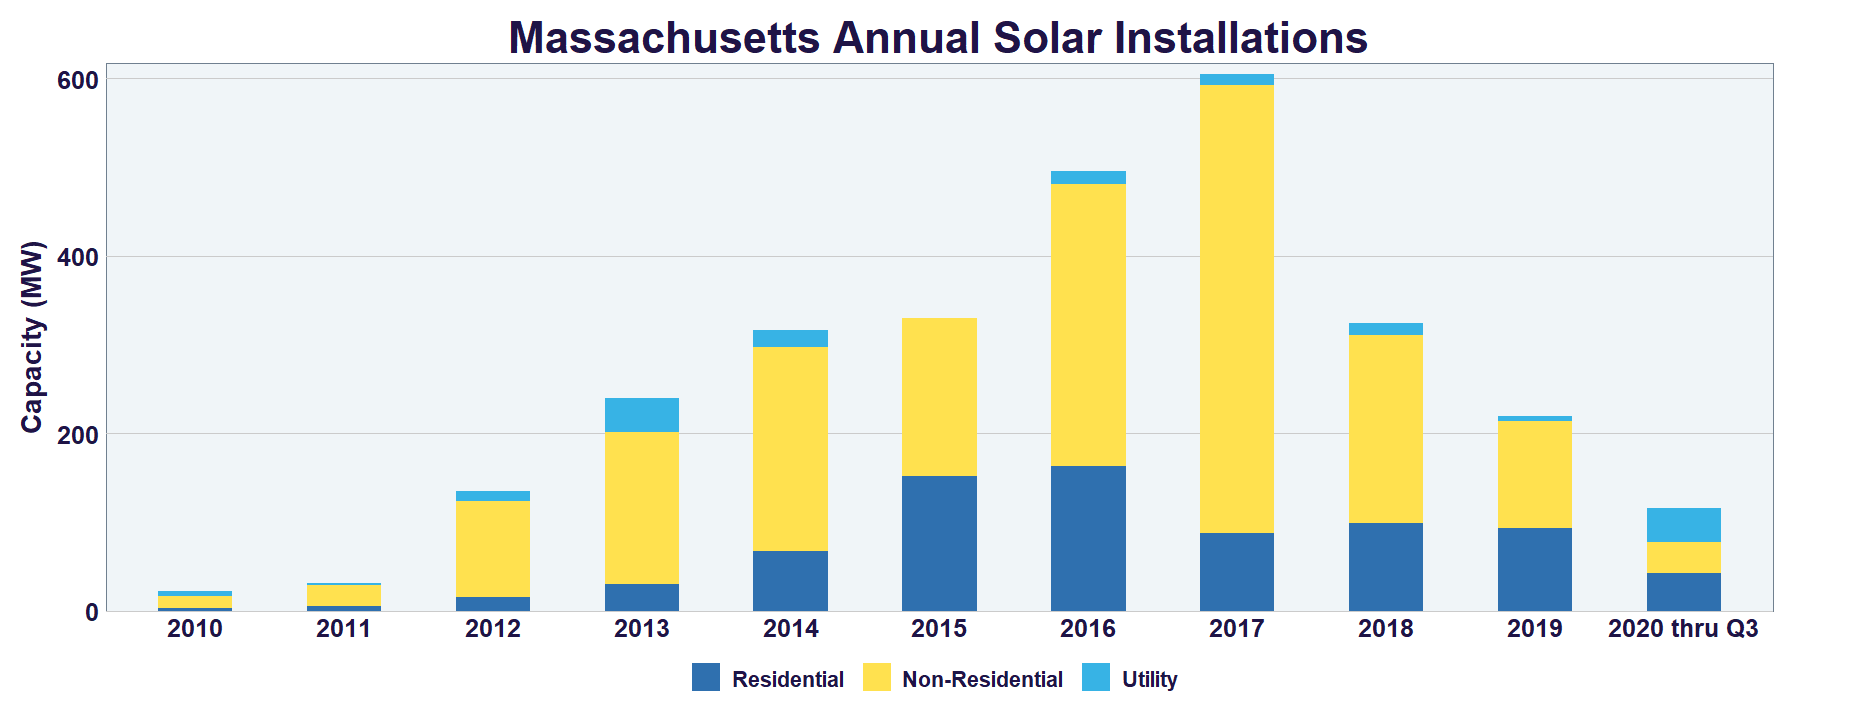 Massachusetts Annual Solar Installations from 2010 until 2020 shows rapid increase from 2010 until 2017, with sharp decline after 2017